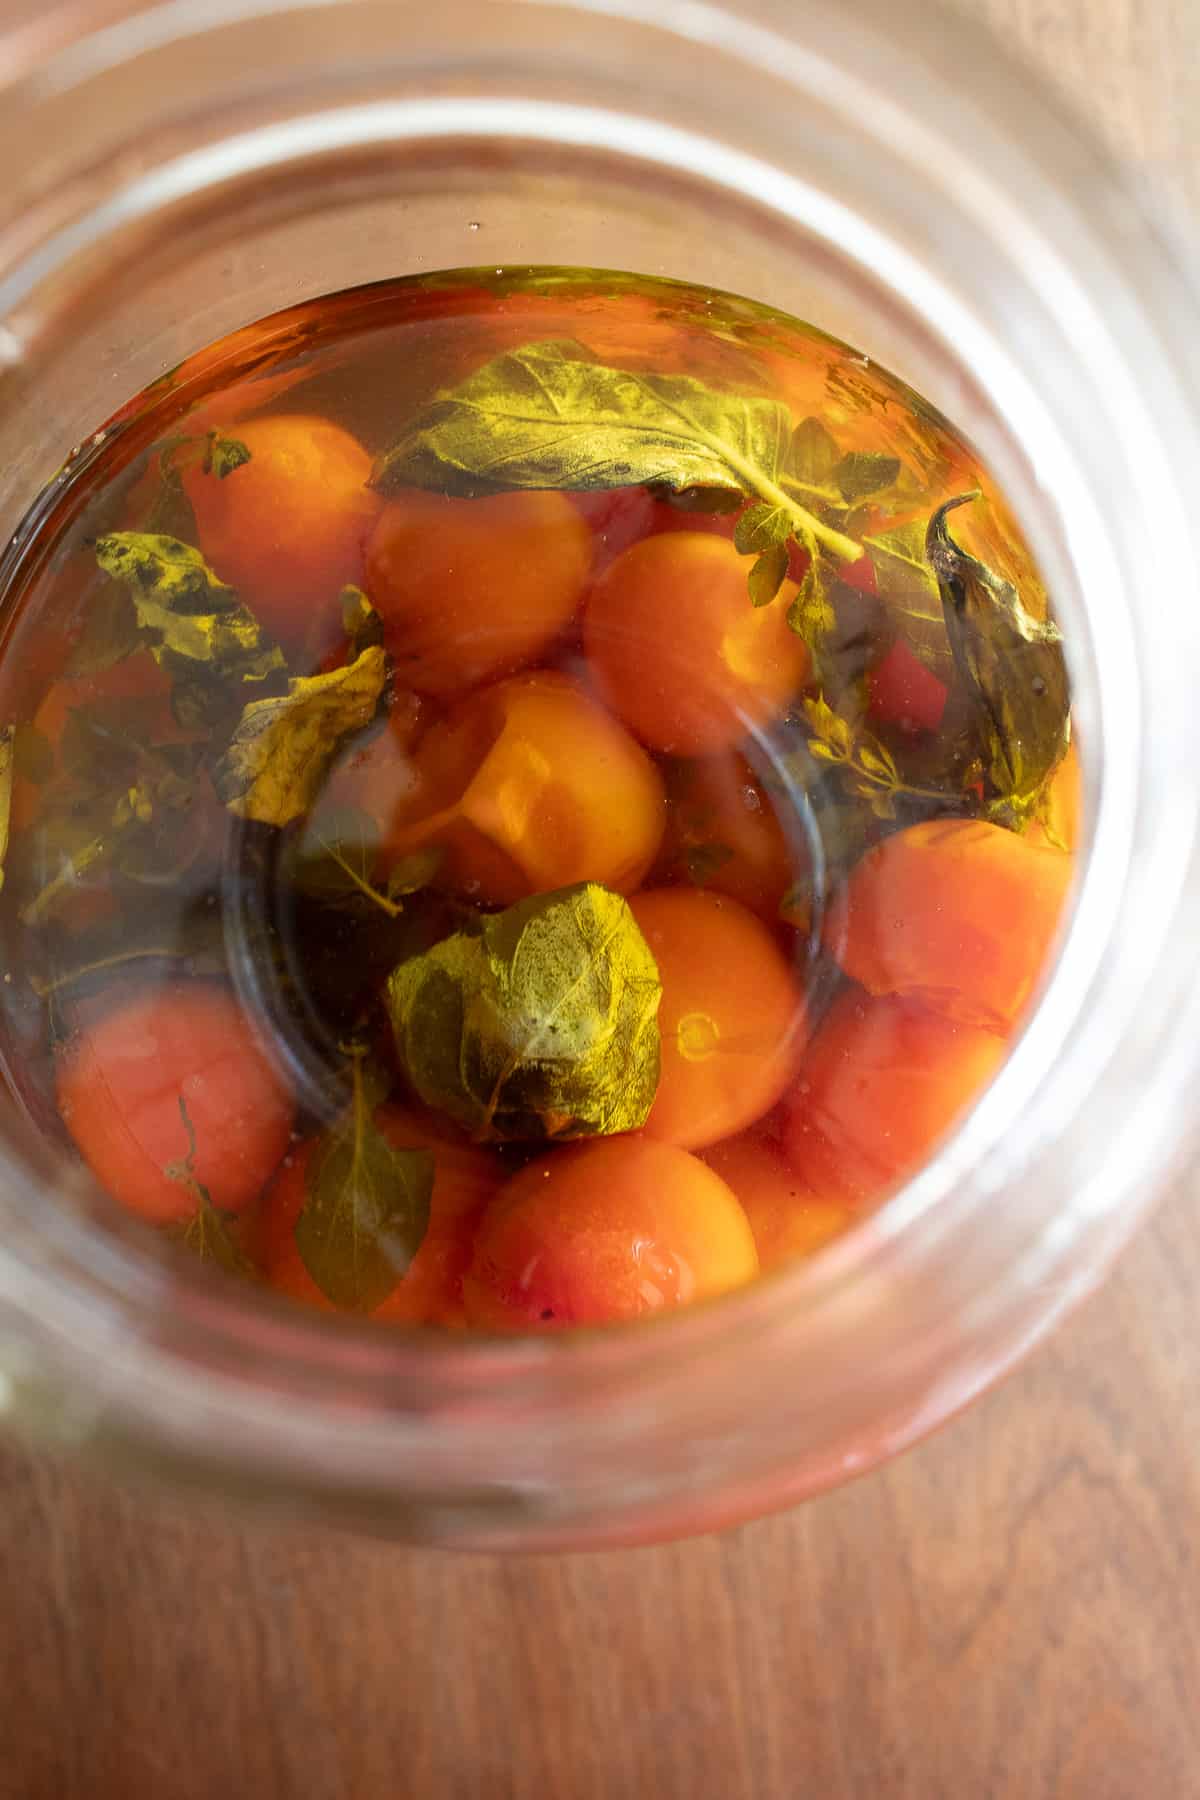 The top-down view of the tomatoes and herbs under the surface of the oil in a jar.